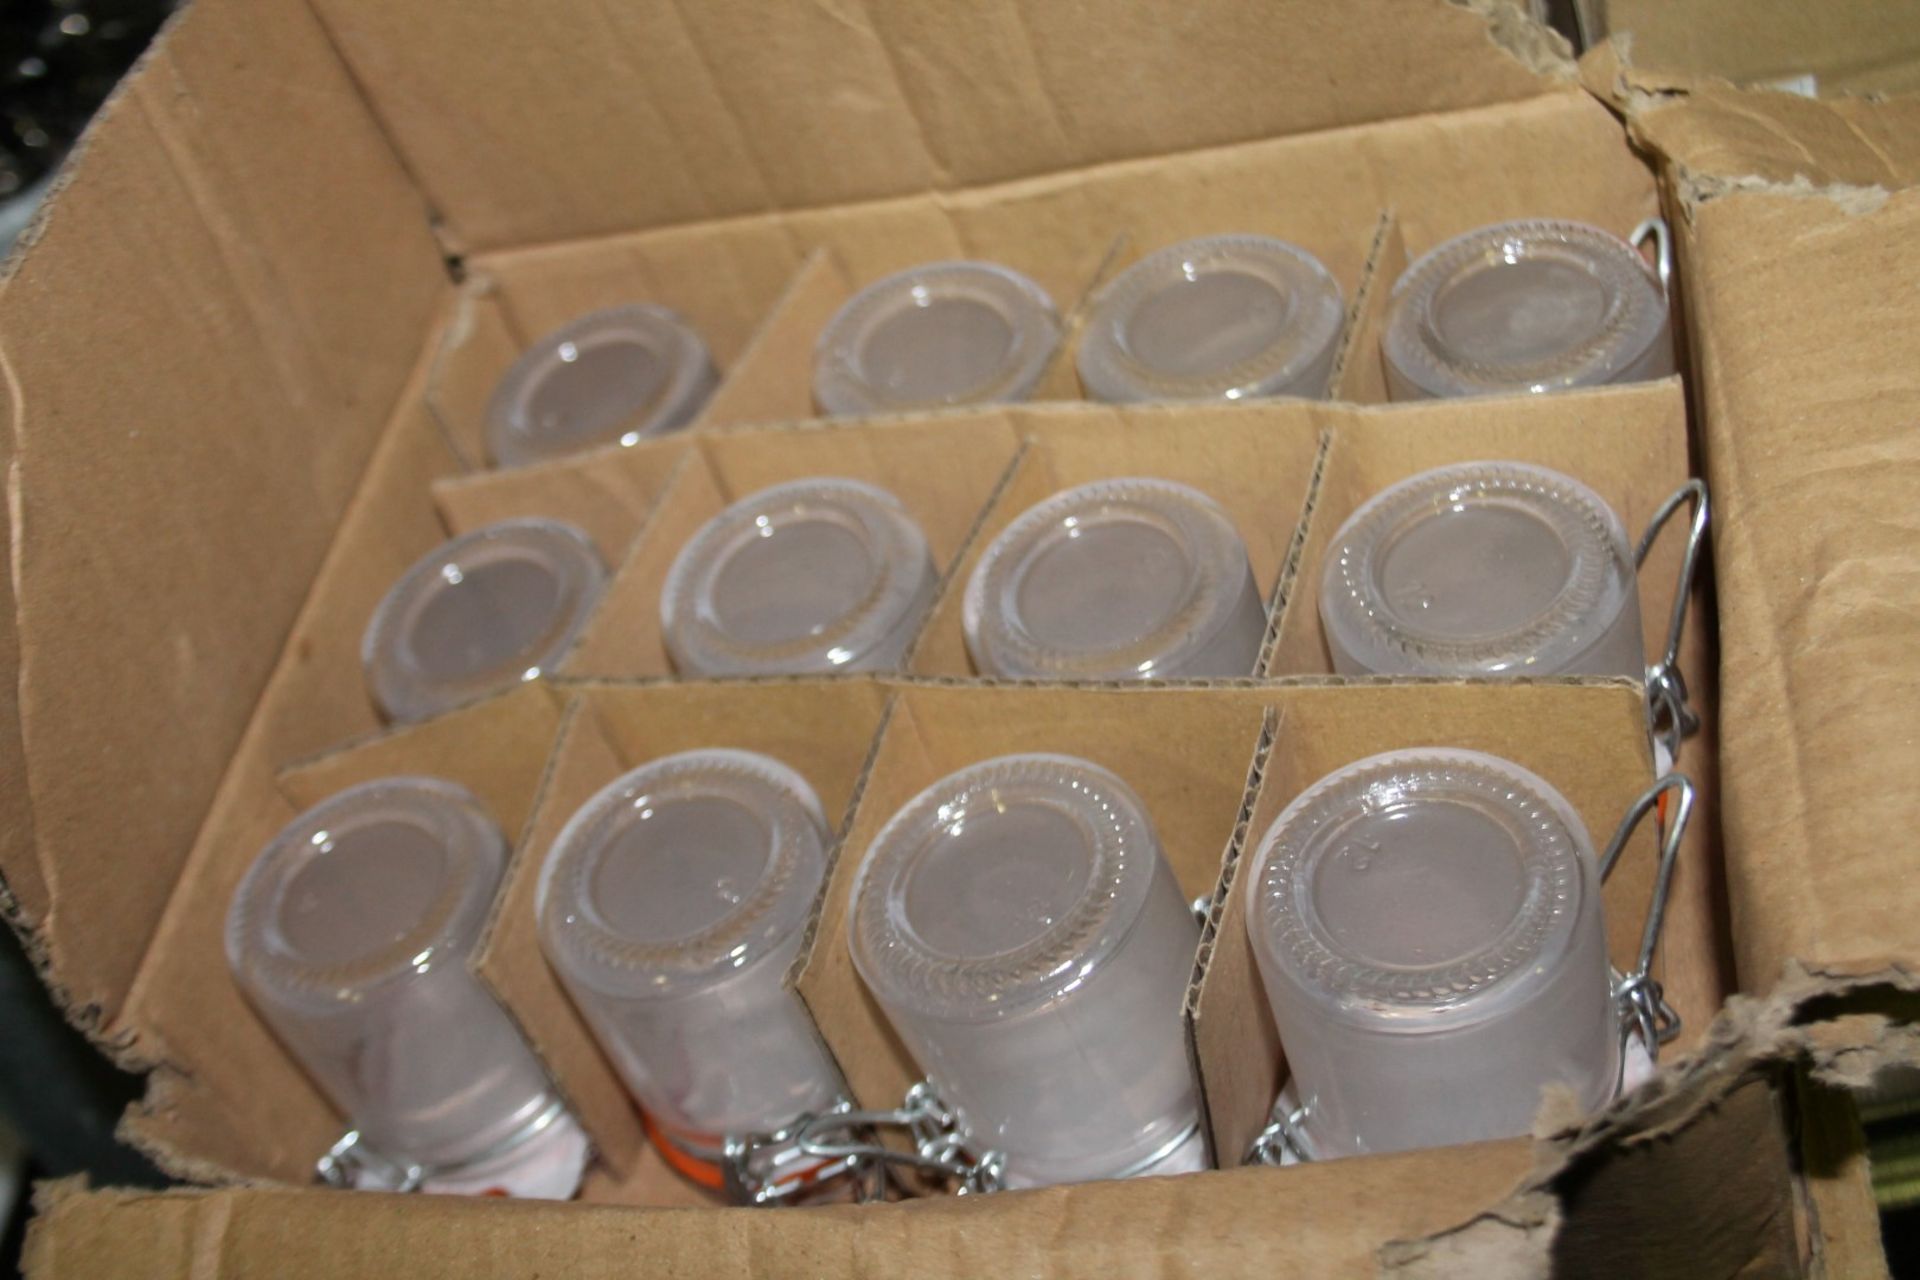 120 x Small Glass Condiment / Perserving Jars - Recently Removed From A Well-known Restaurant In - Image 2 of 6